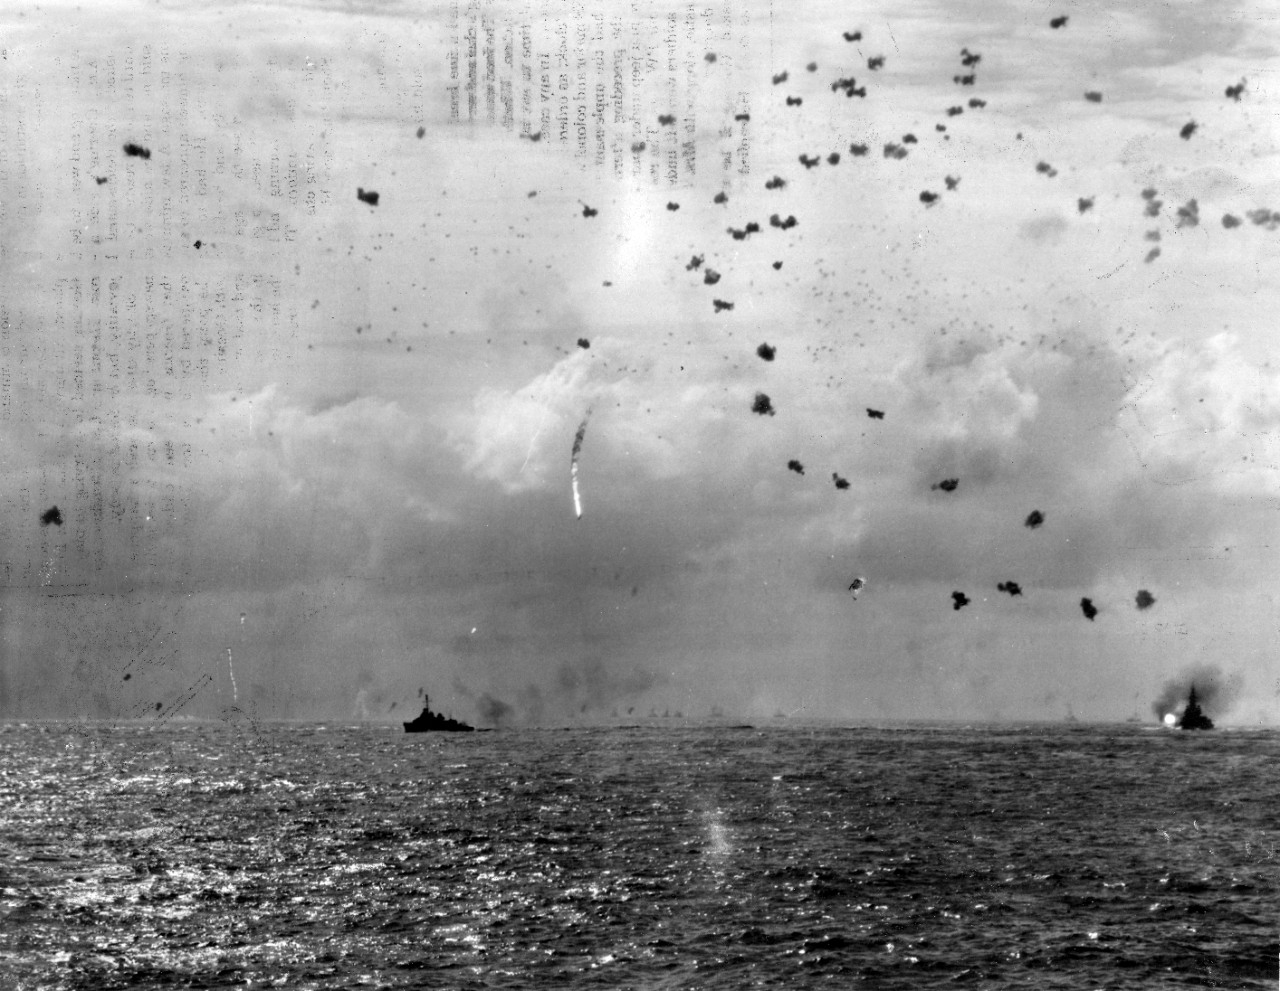 A kamikaze shot down during the Battle of Okinawa